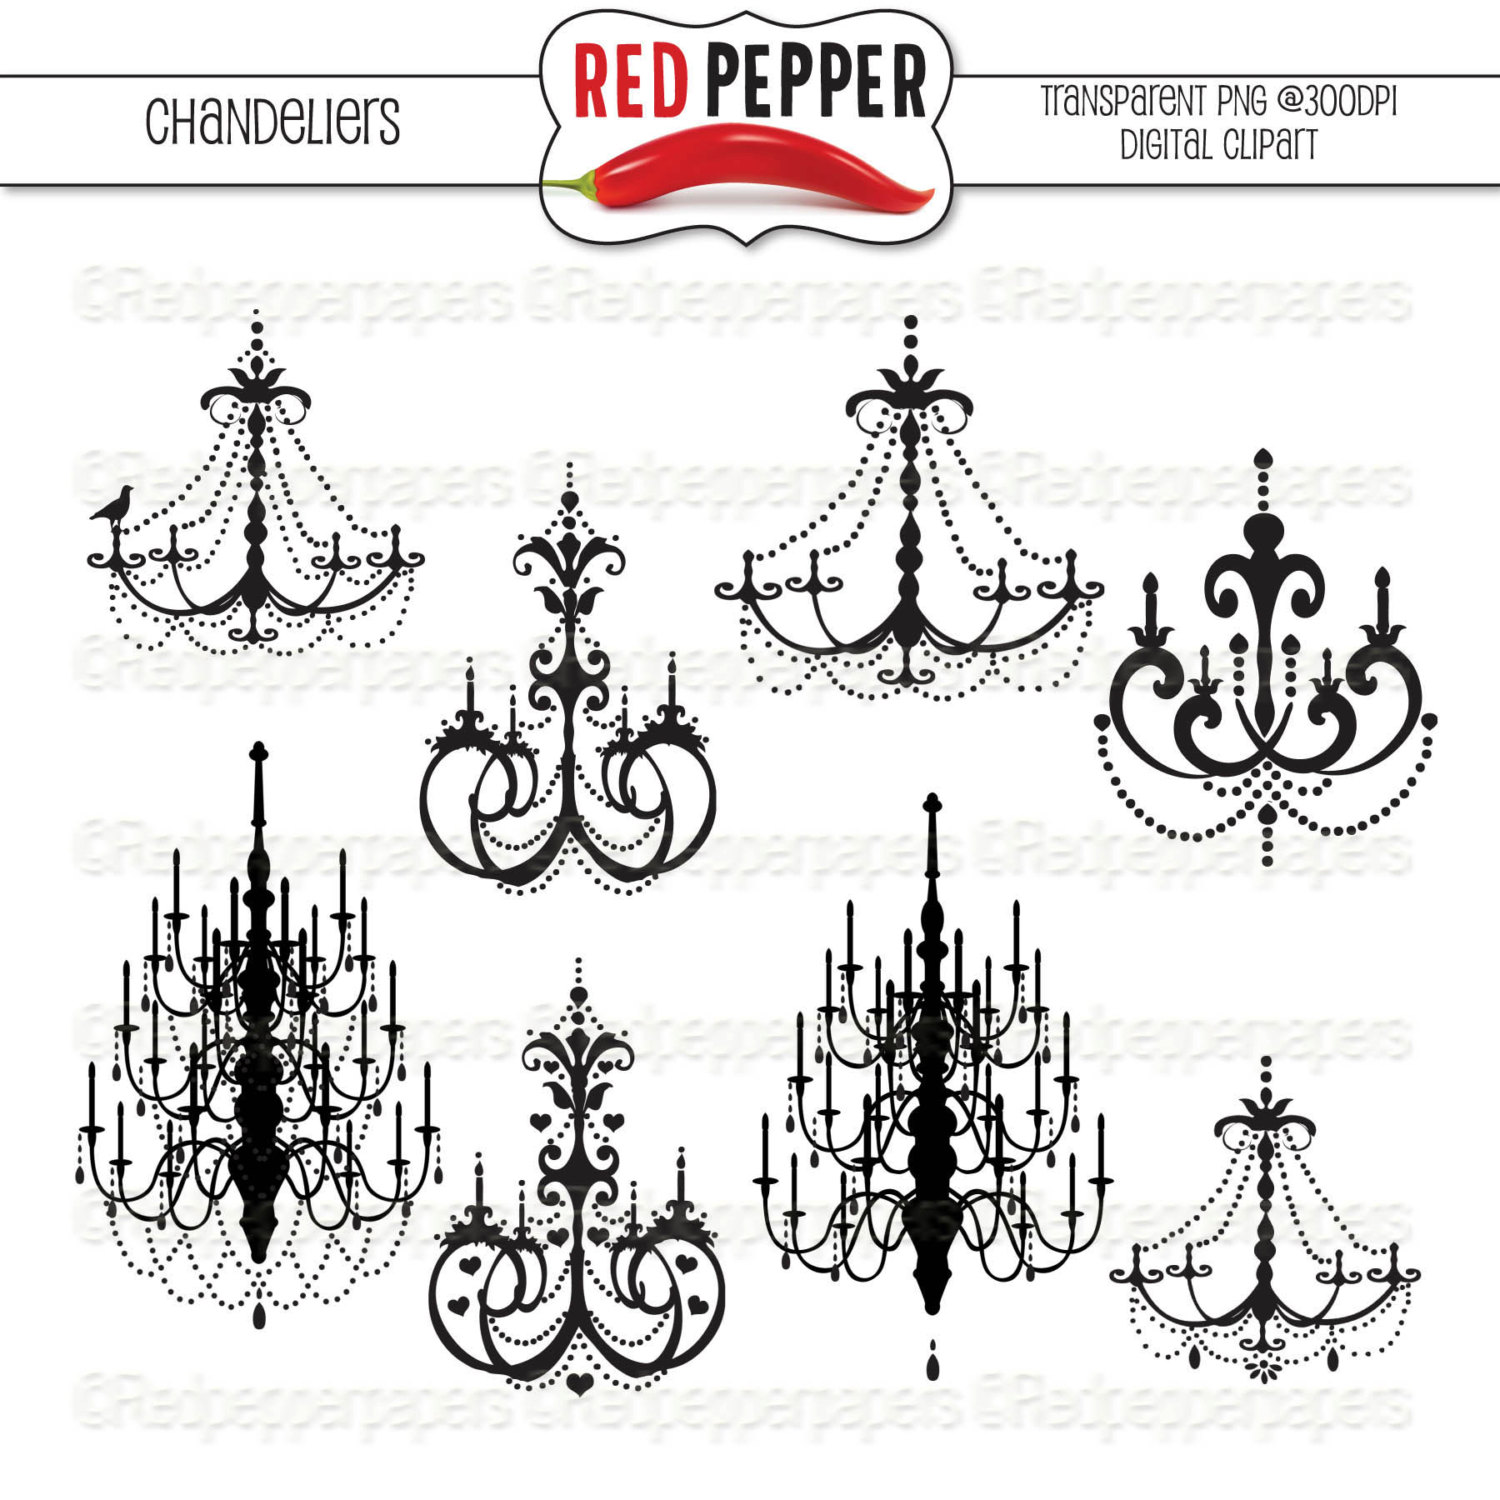 Chandeliers Digital Clipart Instant Download By Redpepperpapers